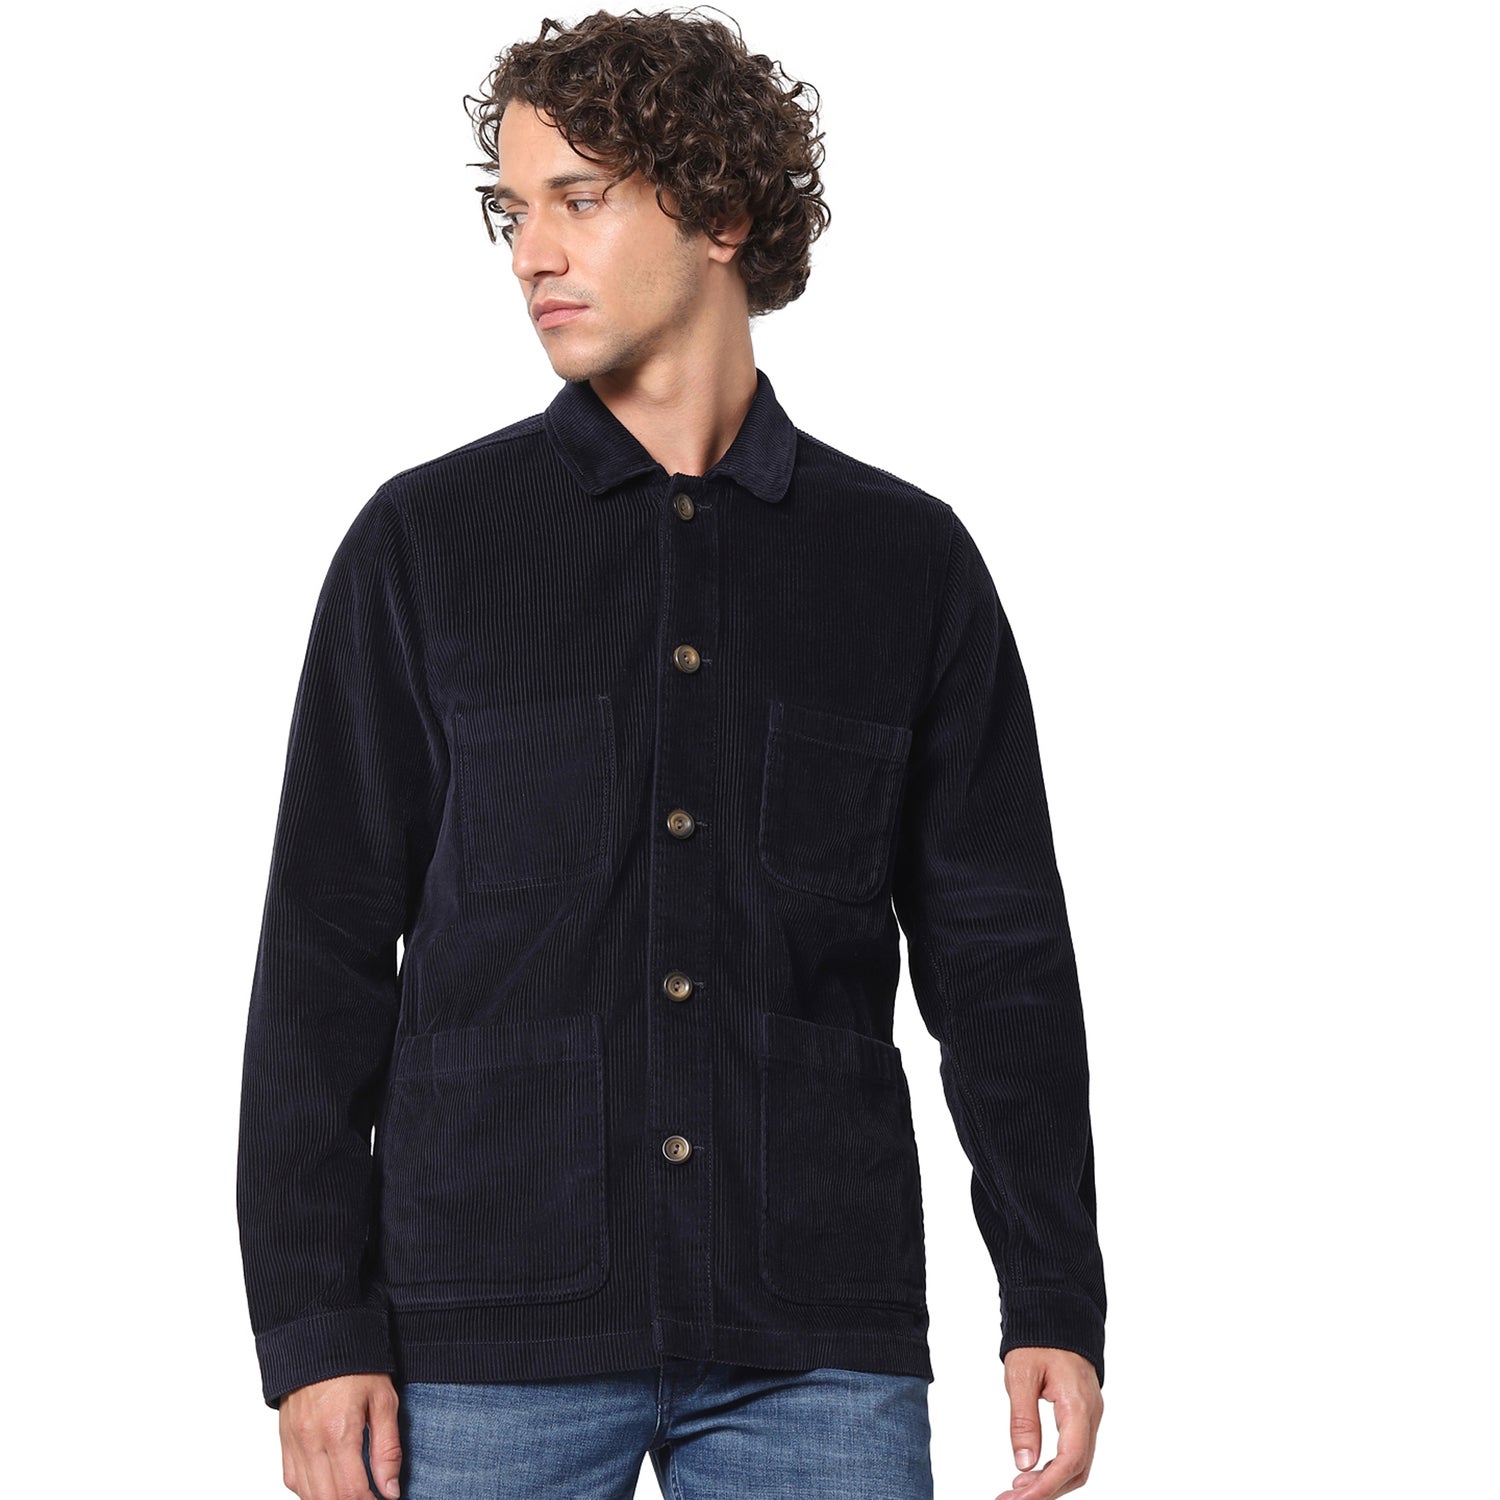 Navy Blue Solid Cotton Long Sleeves Tailored Jacket (VUMUSEVELI)